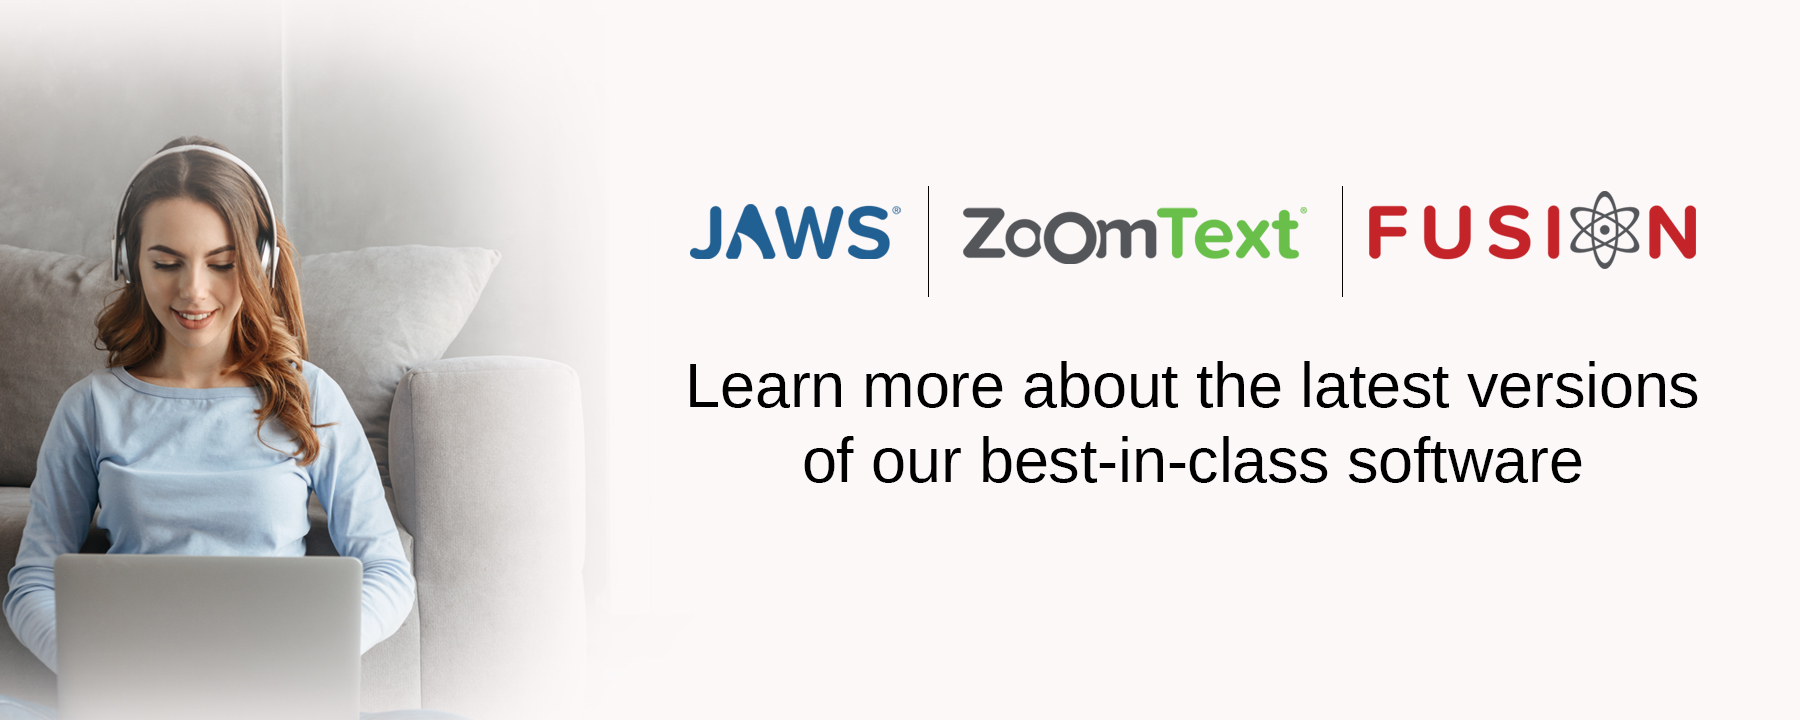 JAWS, ZoomText, Fusion - Learn more about the latest versions of our best-in-class software.